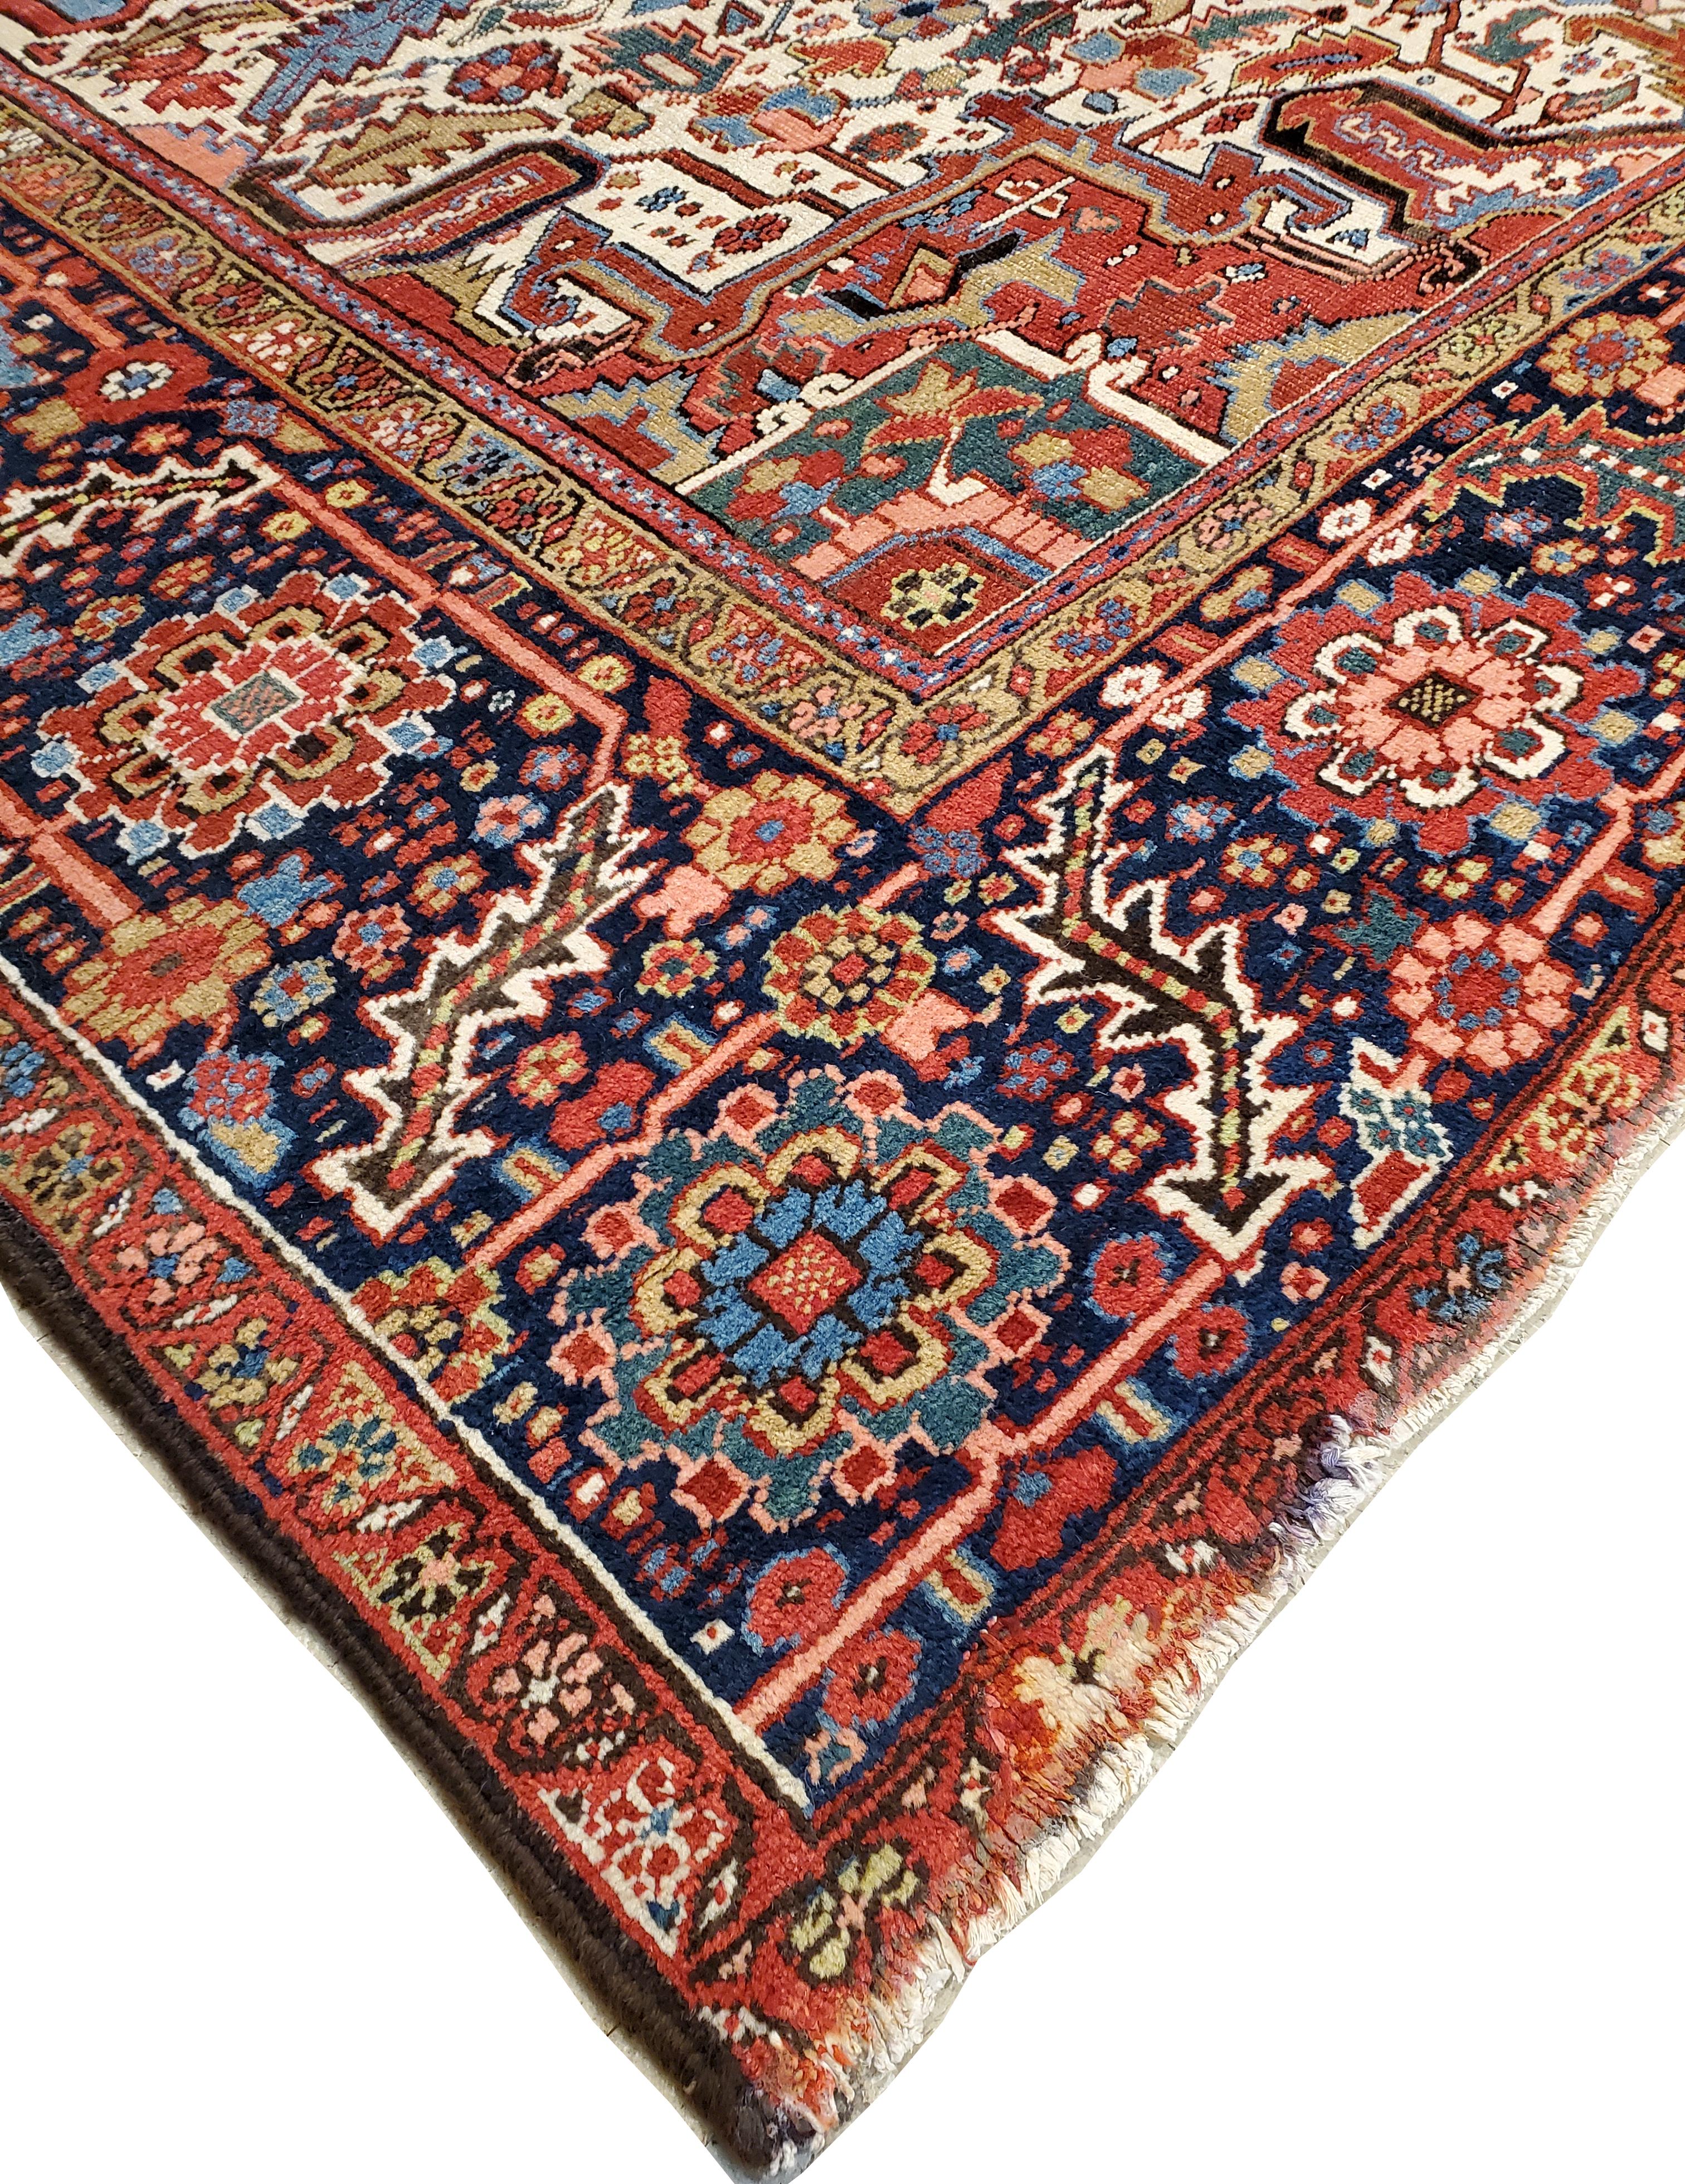 Antique Persian Heriz Carpet, Handmade Wool Oriental Rug, Rust, Navy, Lt Blue In Excellent Condition For Sale In Port Washington, NY